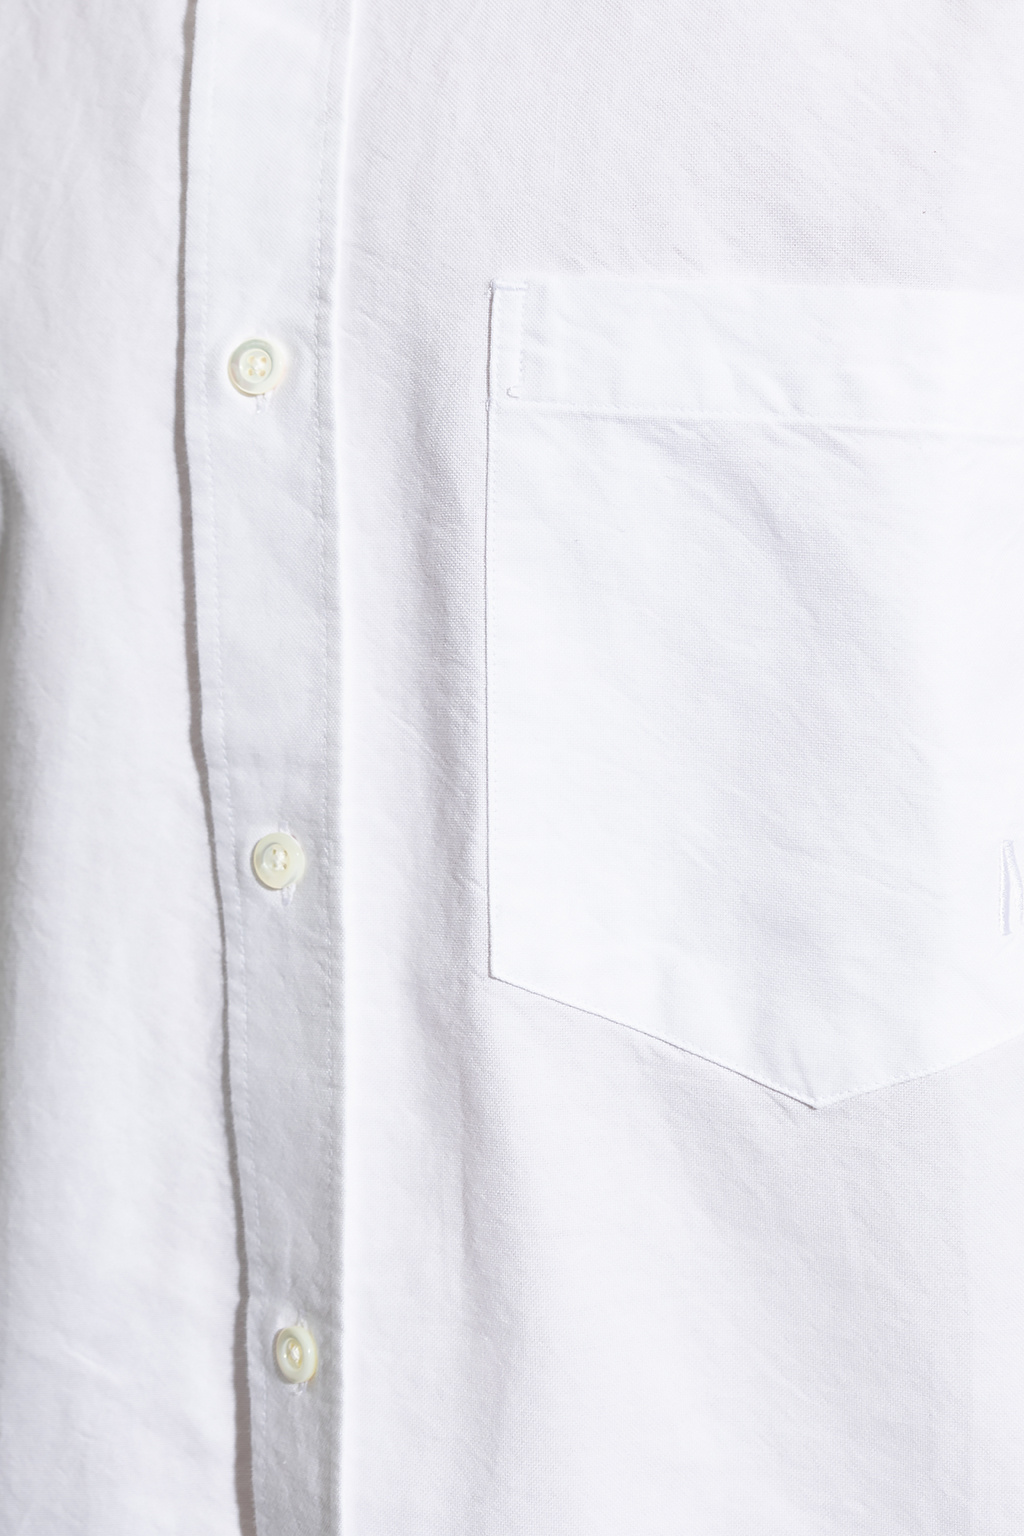 Norse Projects ‘Algot’ Iconic shirt